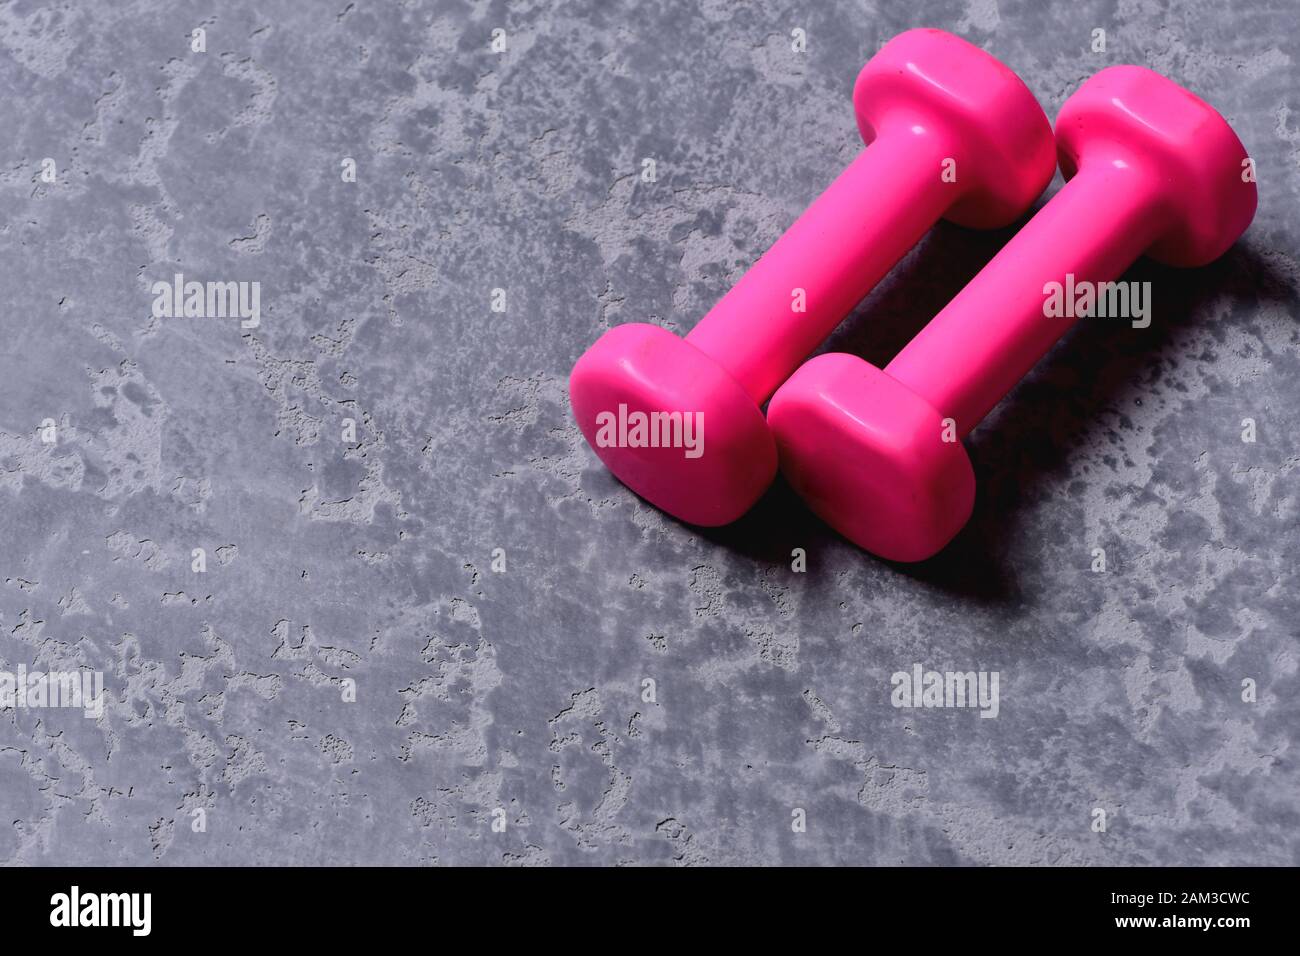 Workout and sport concept. Dumbbells made of bright pink plastic